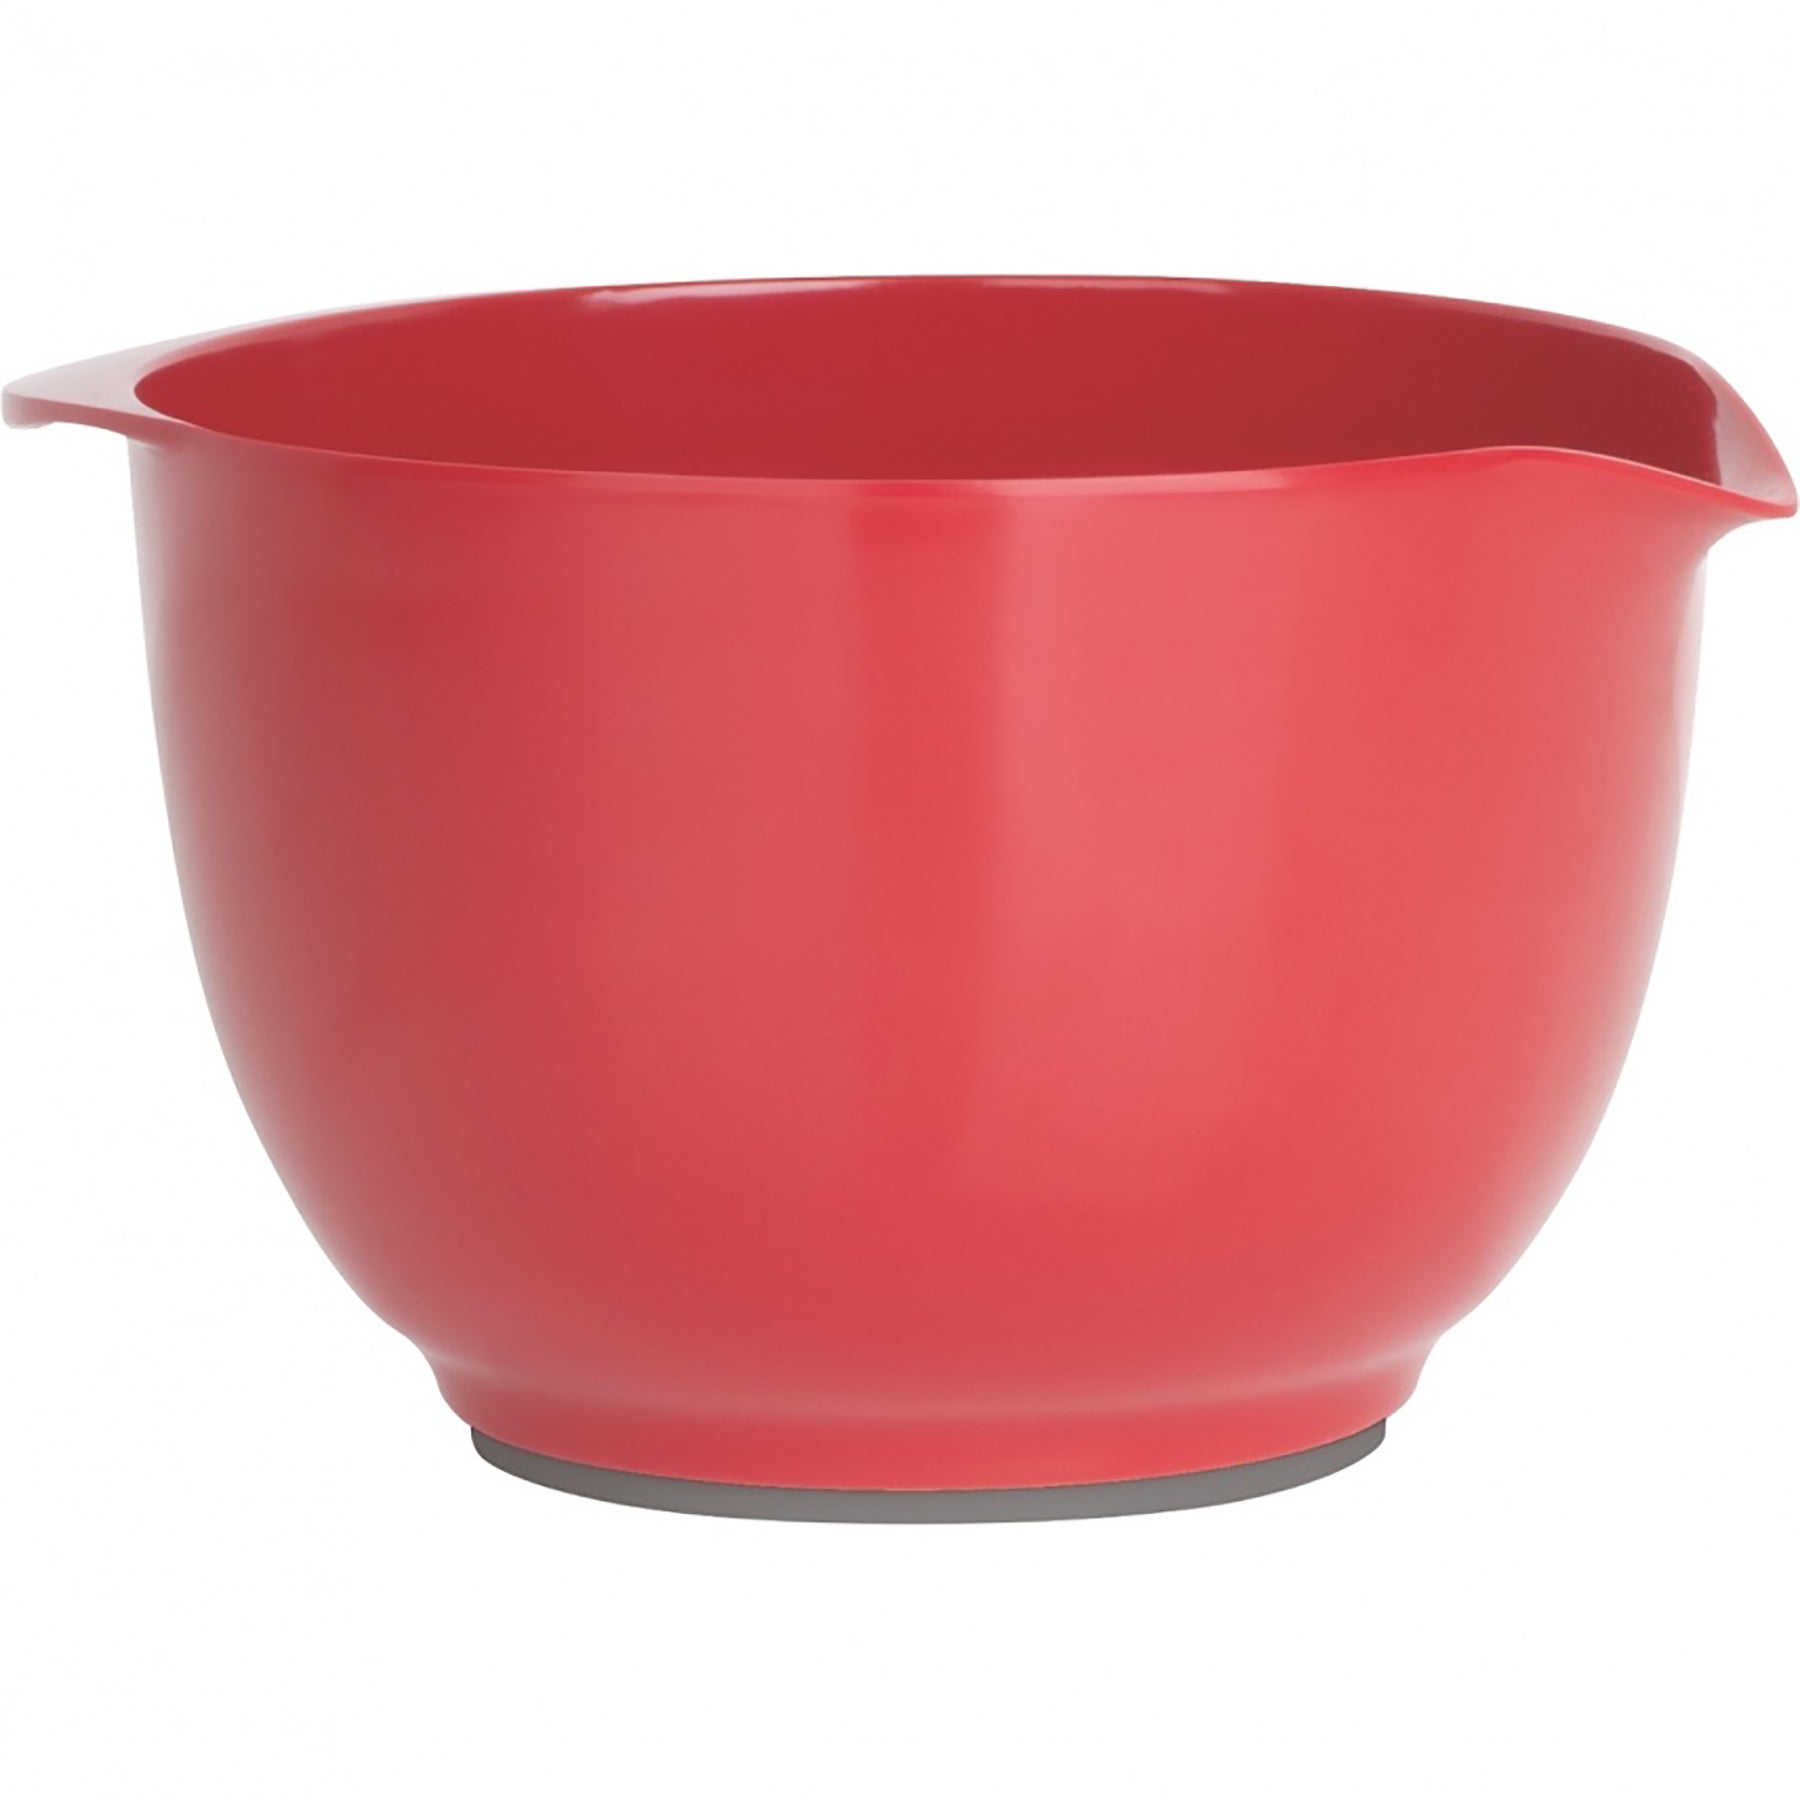 Trudeau Red Melamine Mixing Bowl 1.9L 7x4.75in